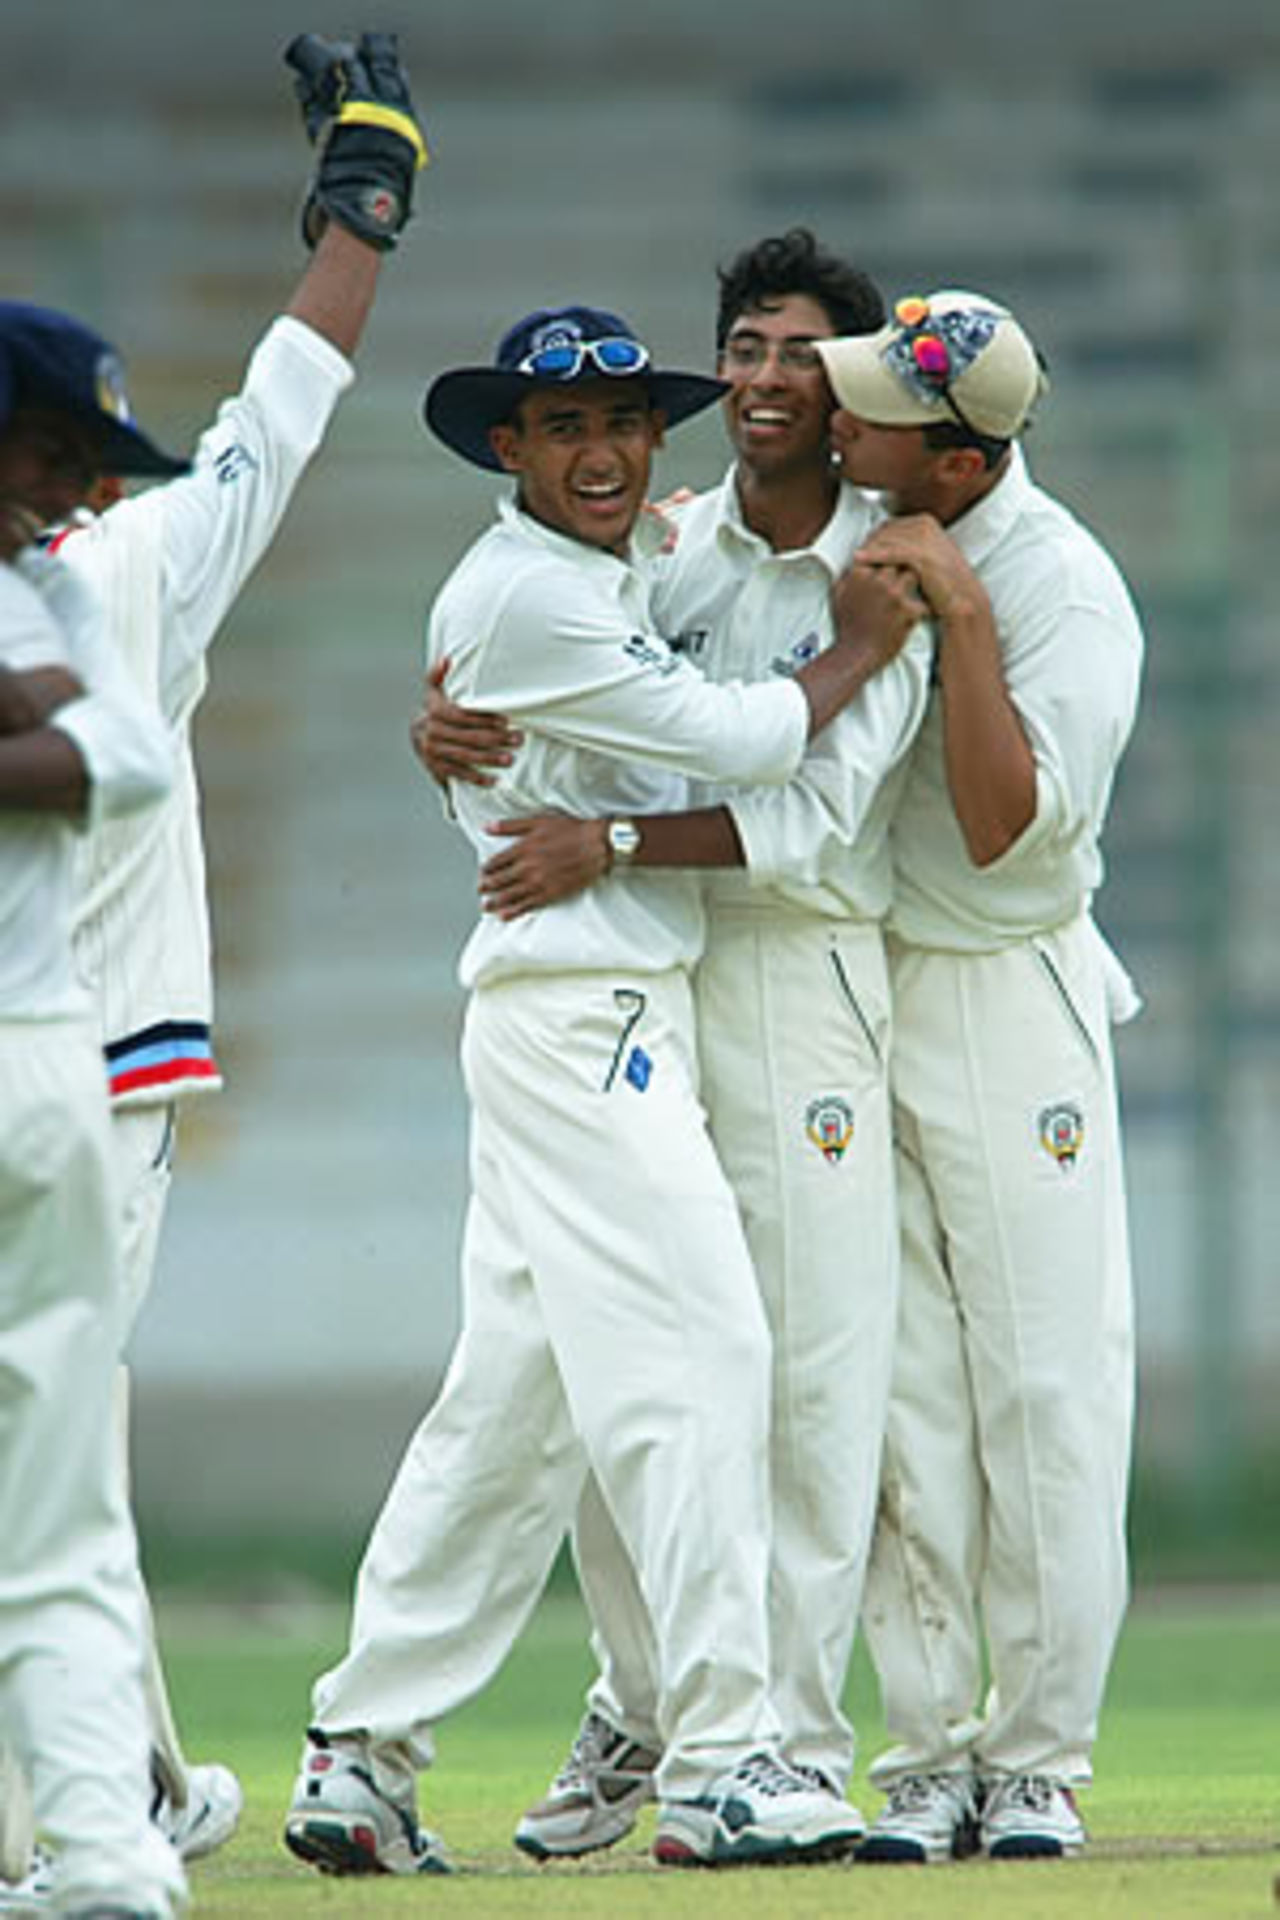 Waqas Jamil and Kuwait players celebrate a wicket, 1st Semi Final: Kuwait Under-19s v Nepal Under-19s at National Stadium, Karachi, Youth Asia Cup 2003, 26 July 2003.